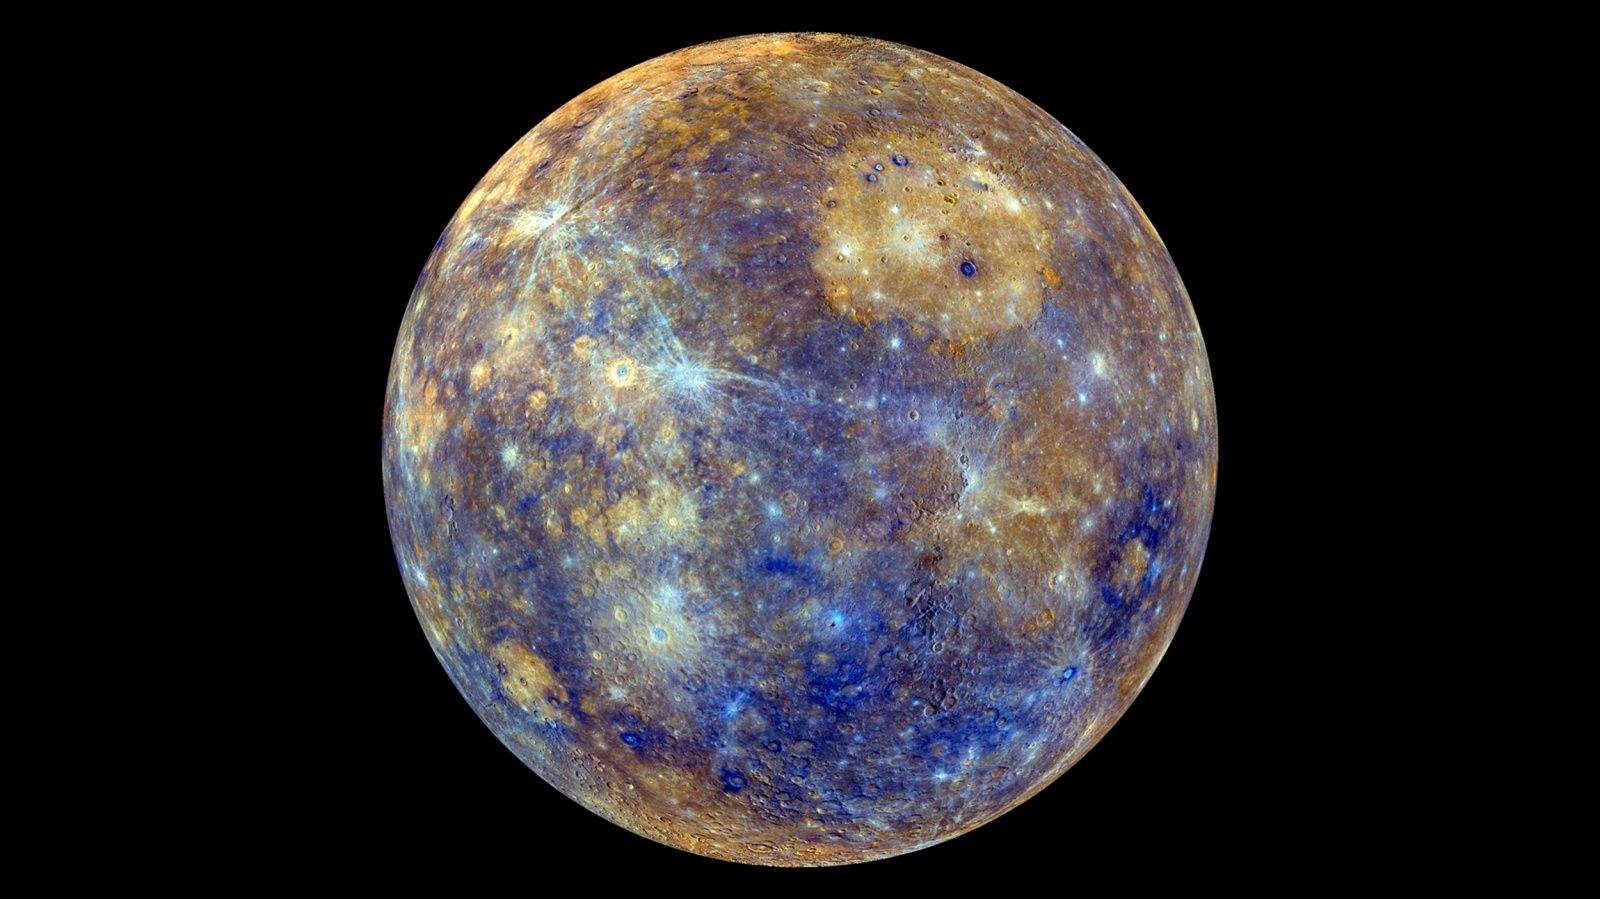 This  view of Mercury was produced by using images from the color base map imaging campaign during MESSENGER's primary mission. These colors are not what Mercury would look like to the human eye, but rather the colors enhance the chemical, mineralogical, and physical differences between the rocks that make up Mercury's surface. Photo: NASA/Johns Hopkins University Applied Physics Laboratory/Carnegie Institution of Washington